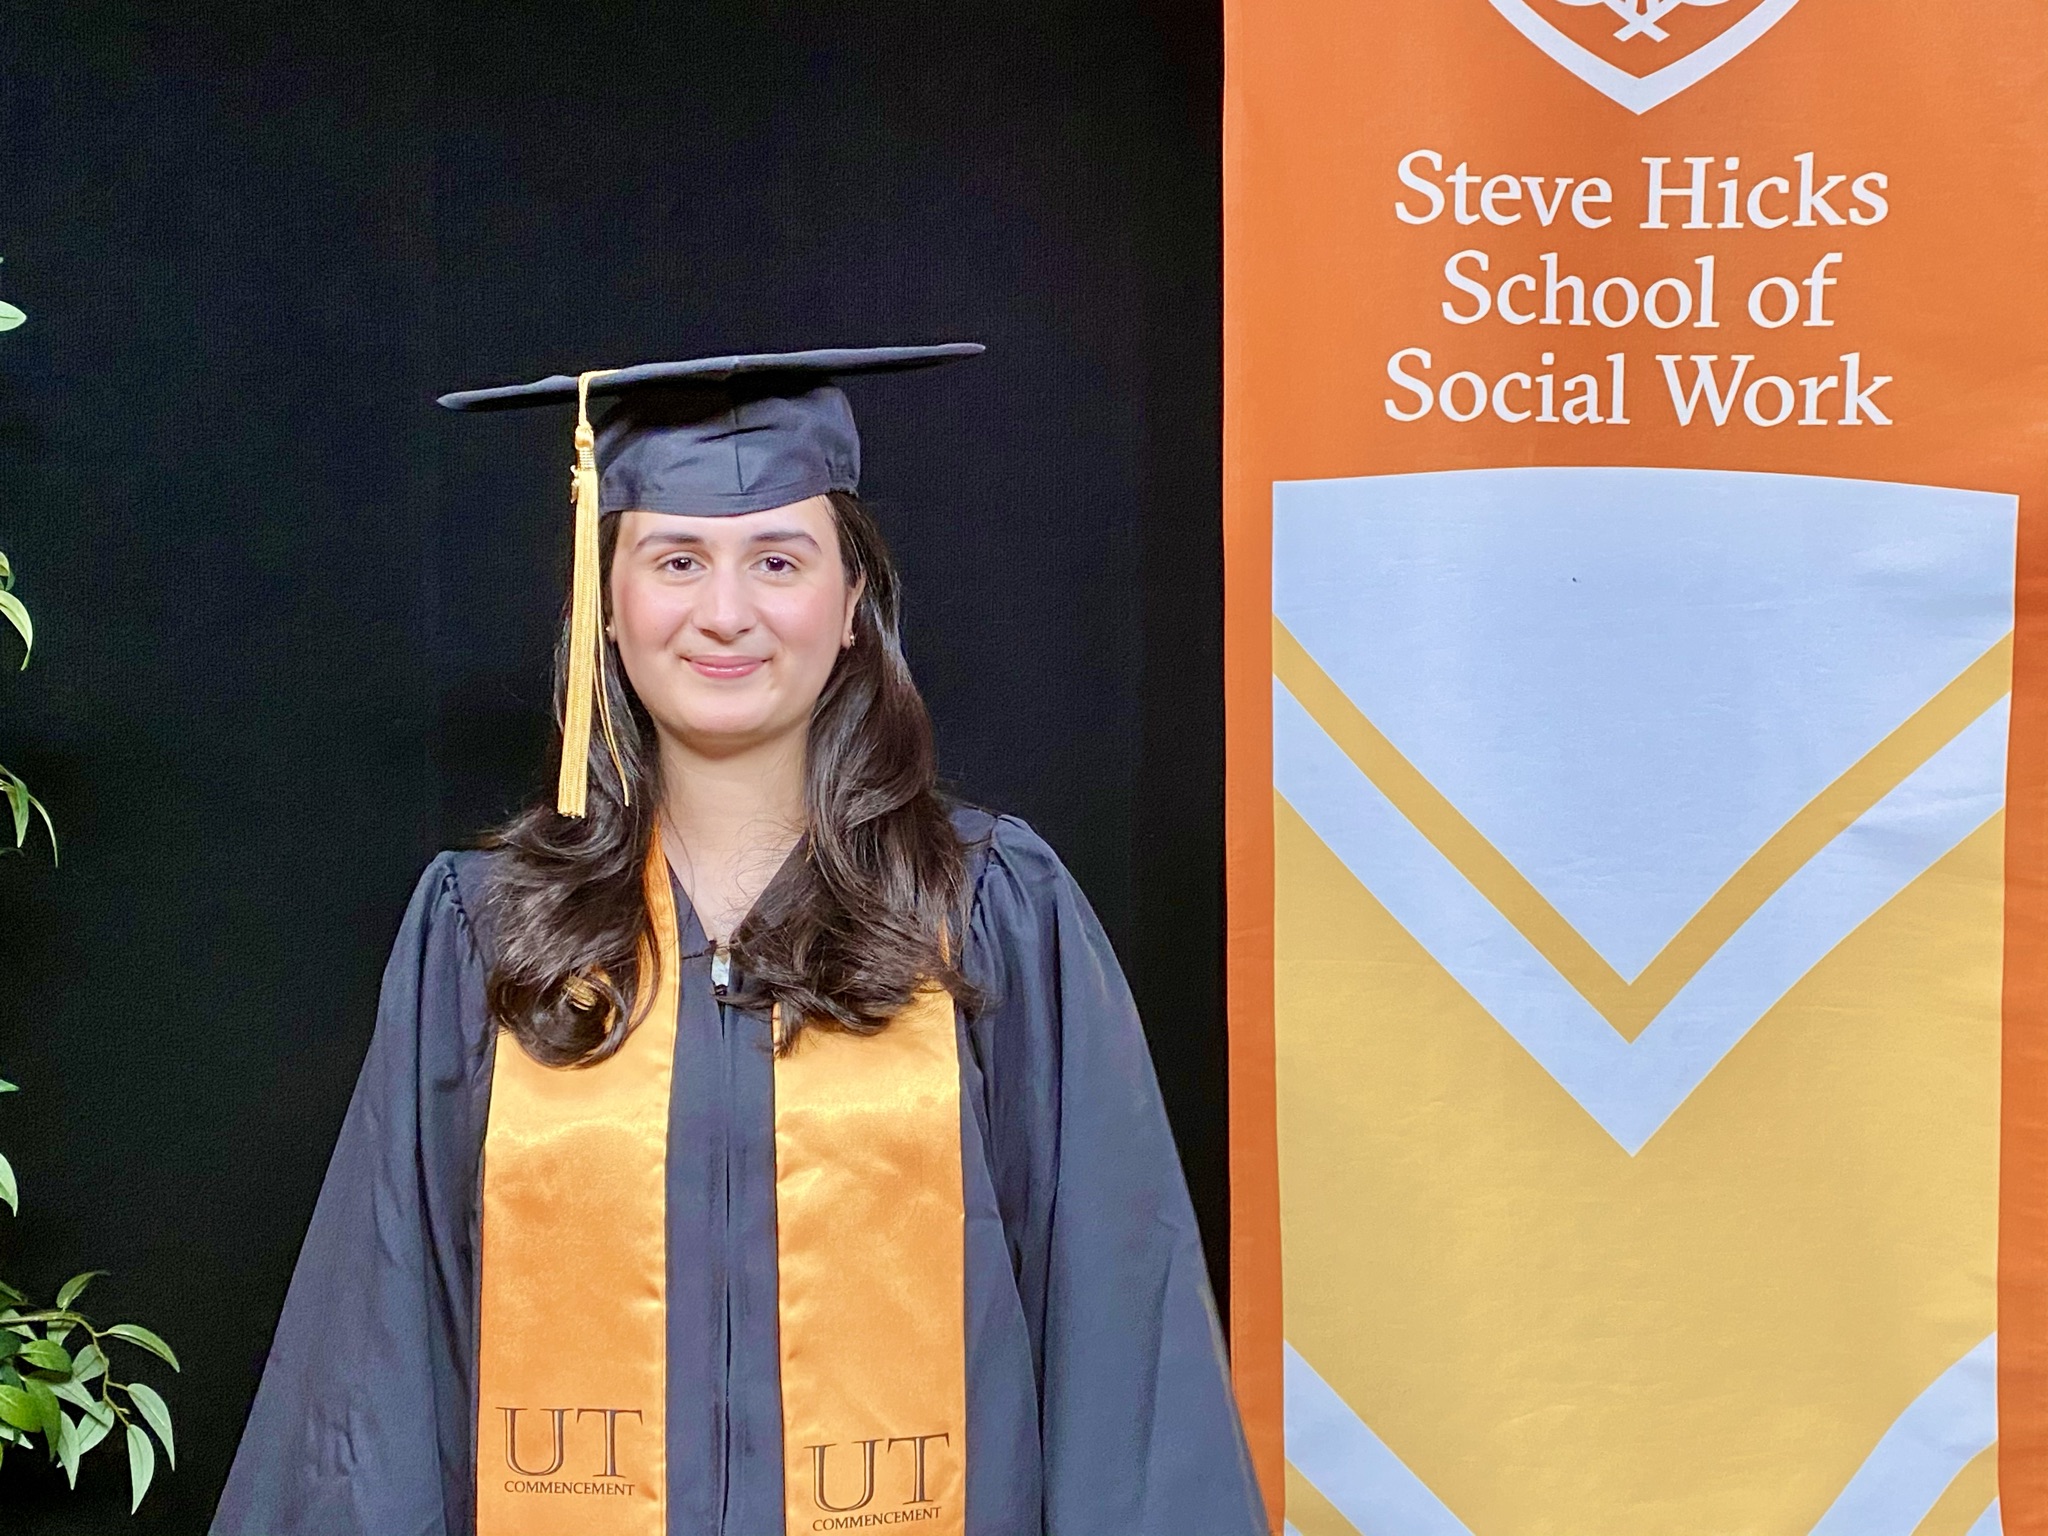 woman in graduation cap and gown with orange sash stands next to orange banner 